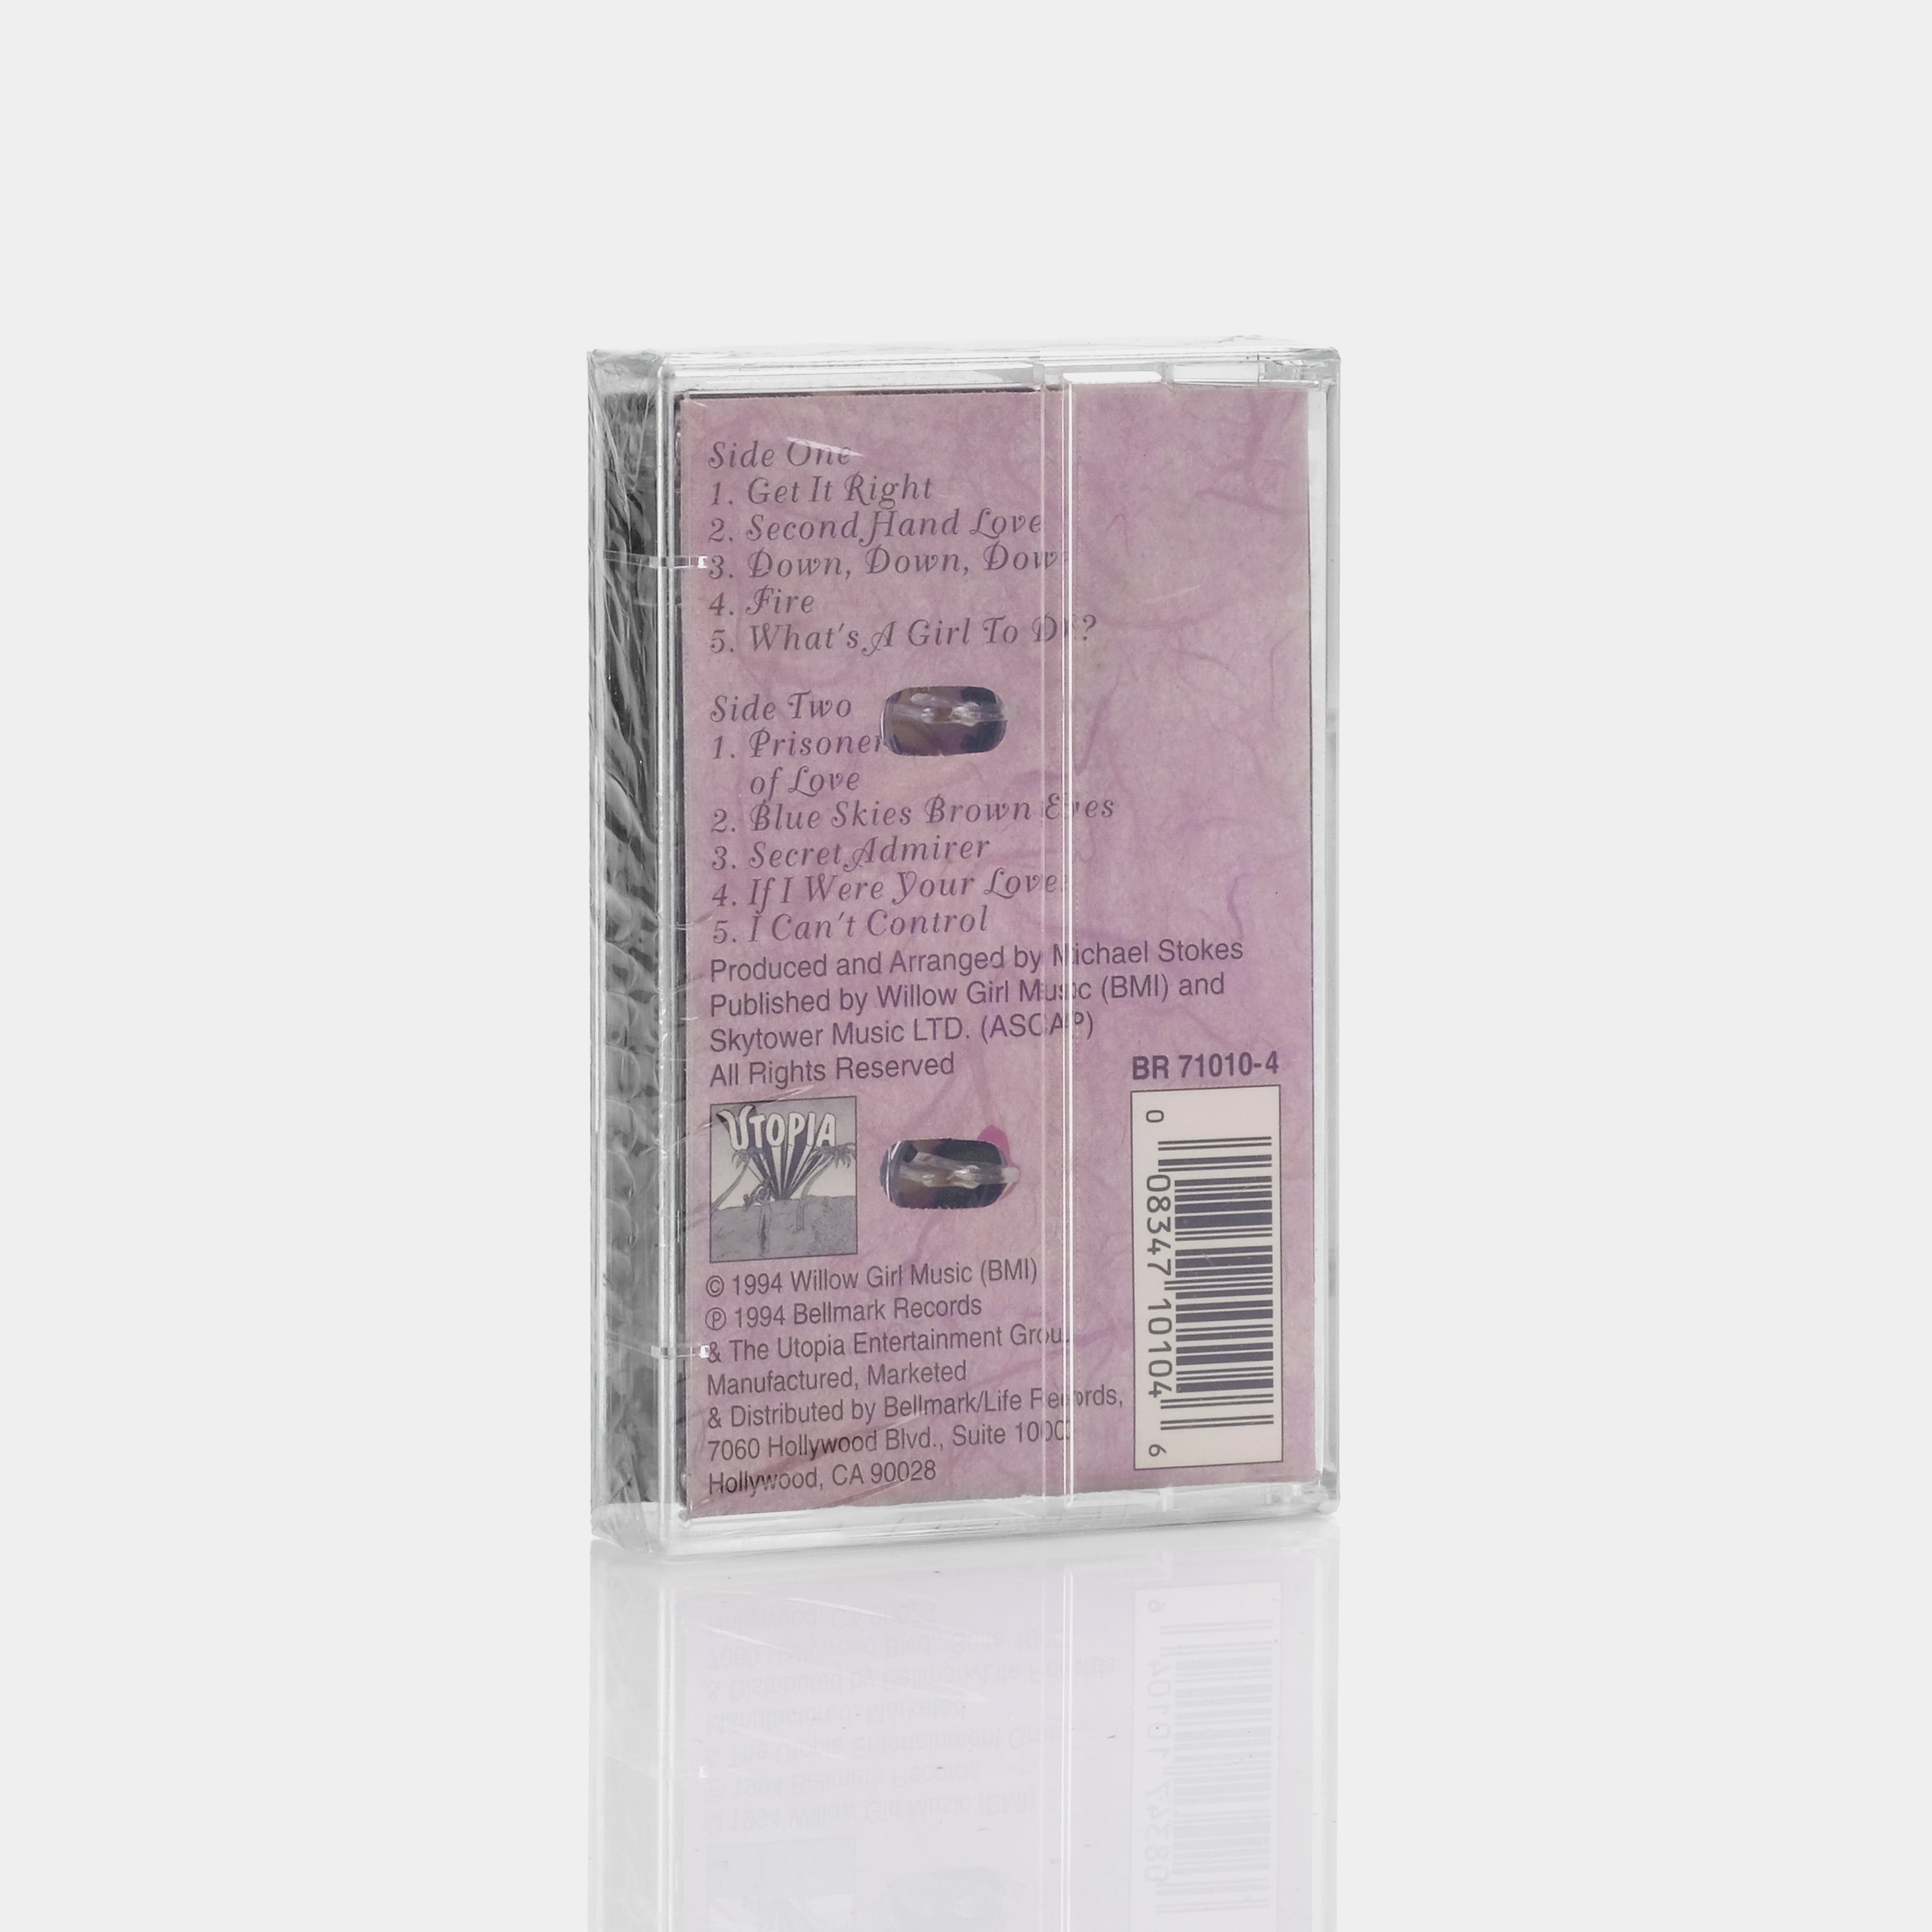 LSO - What's A Girl To Do? Cassette Tape